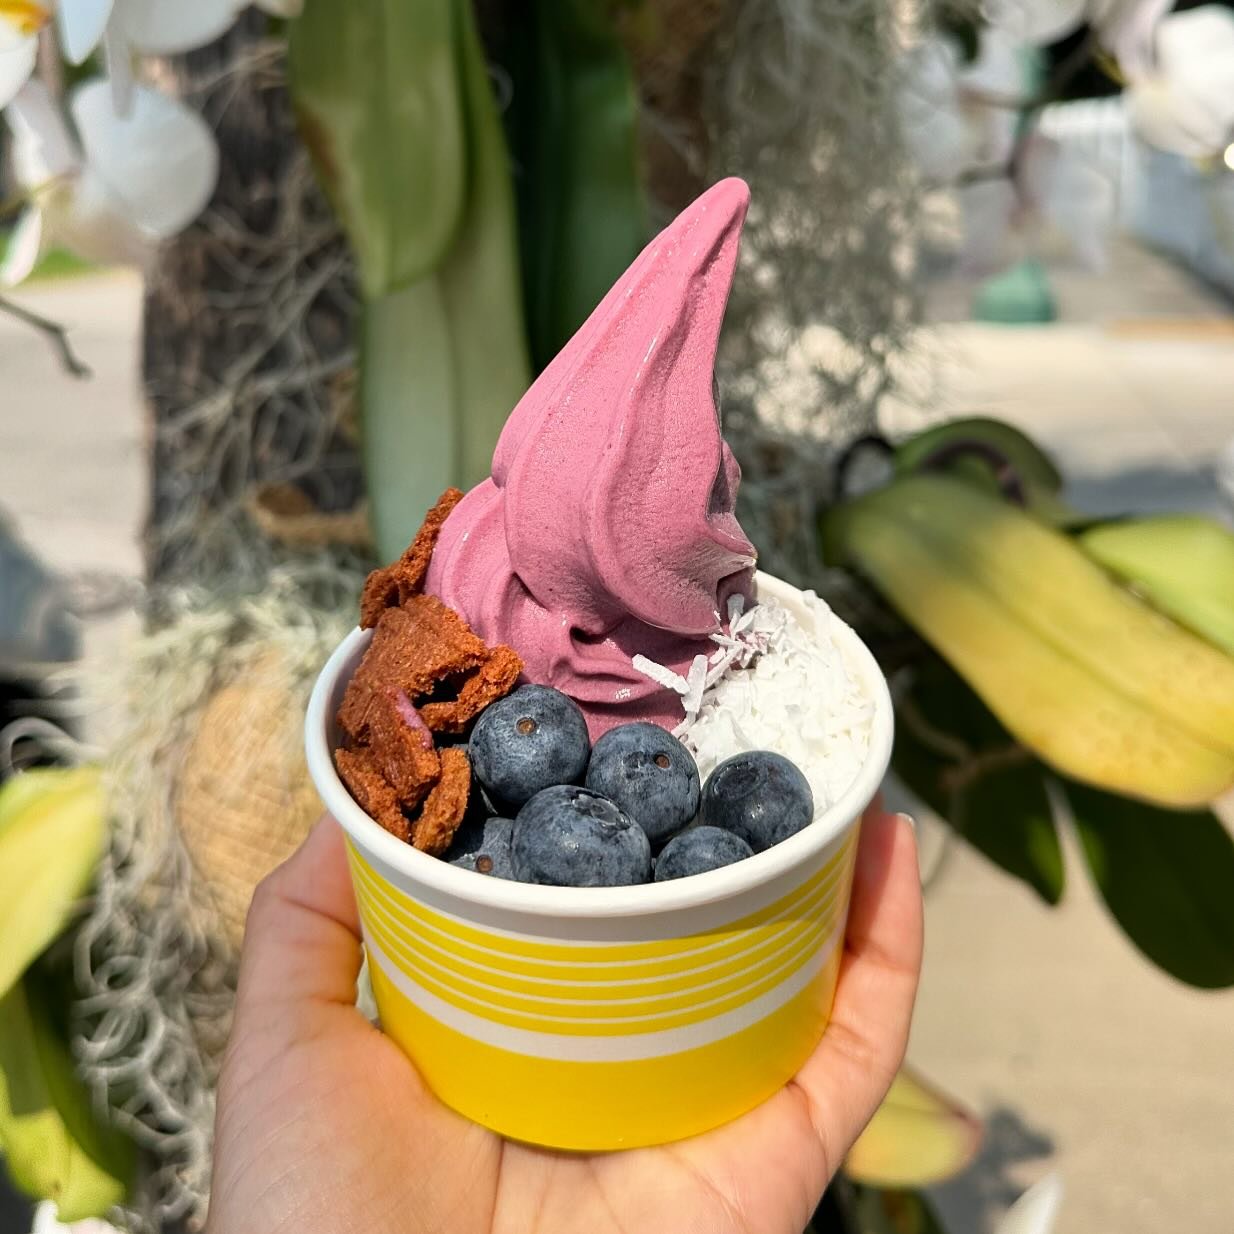 UBE! 💜 the purple sweet potato that keeps on giving is our flavor for the week. I topped it with coconut flakes, fresh blueberries and gluten free homemade cone bits but really goes well with everything. 

Available both at miami shores + design dis